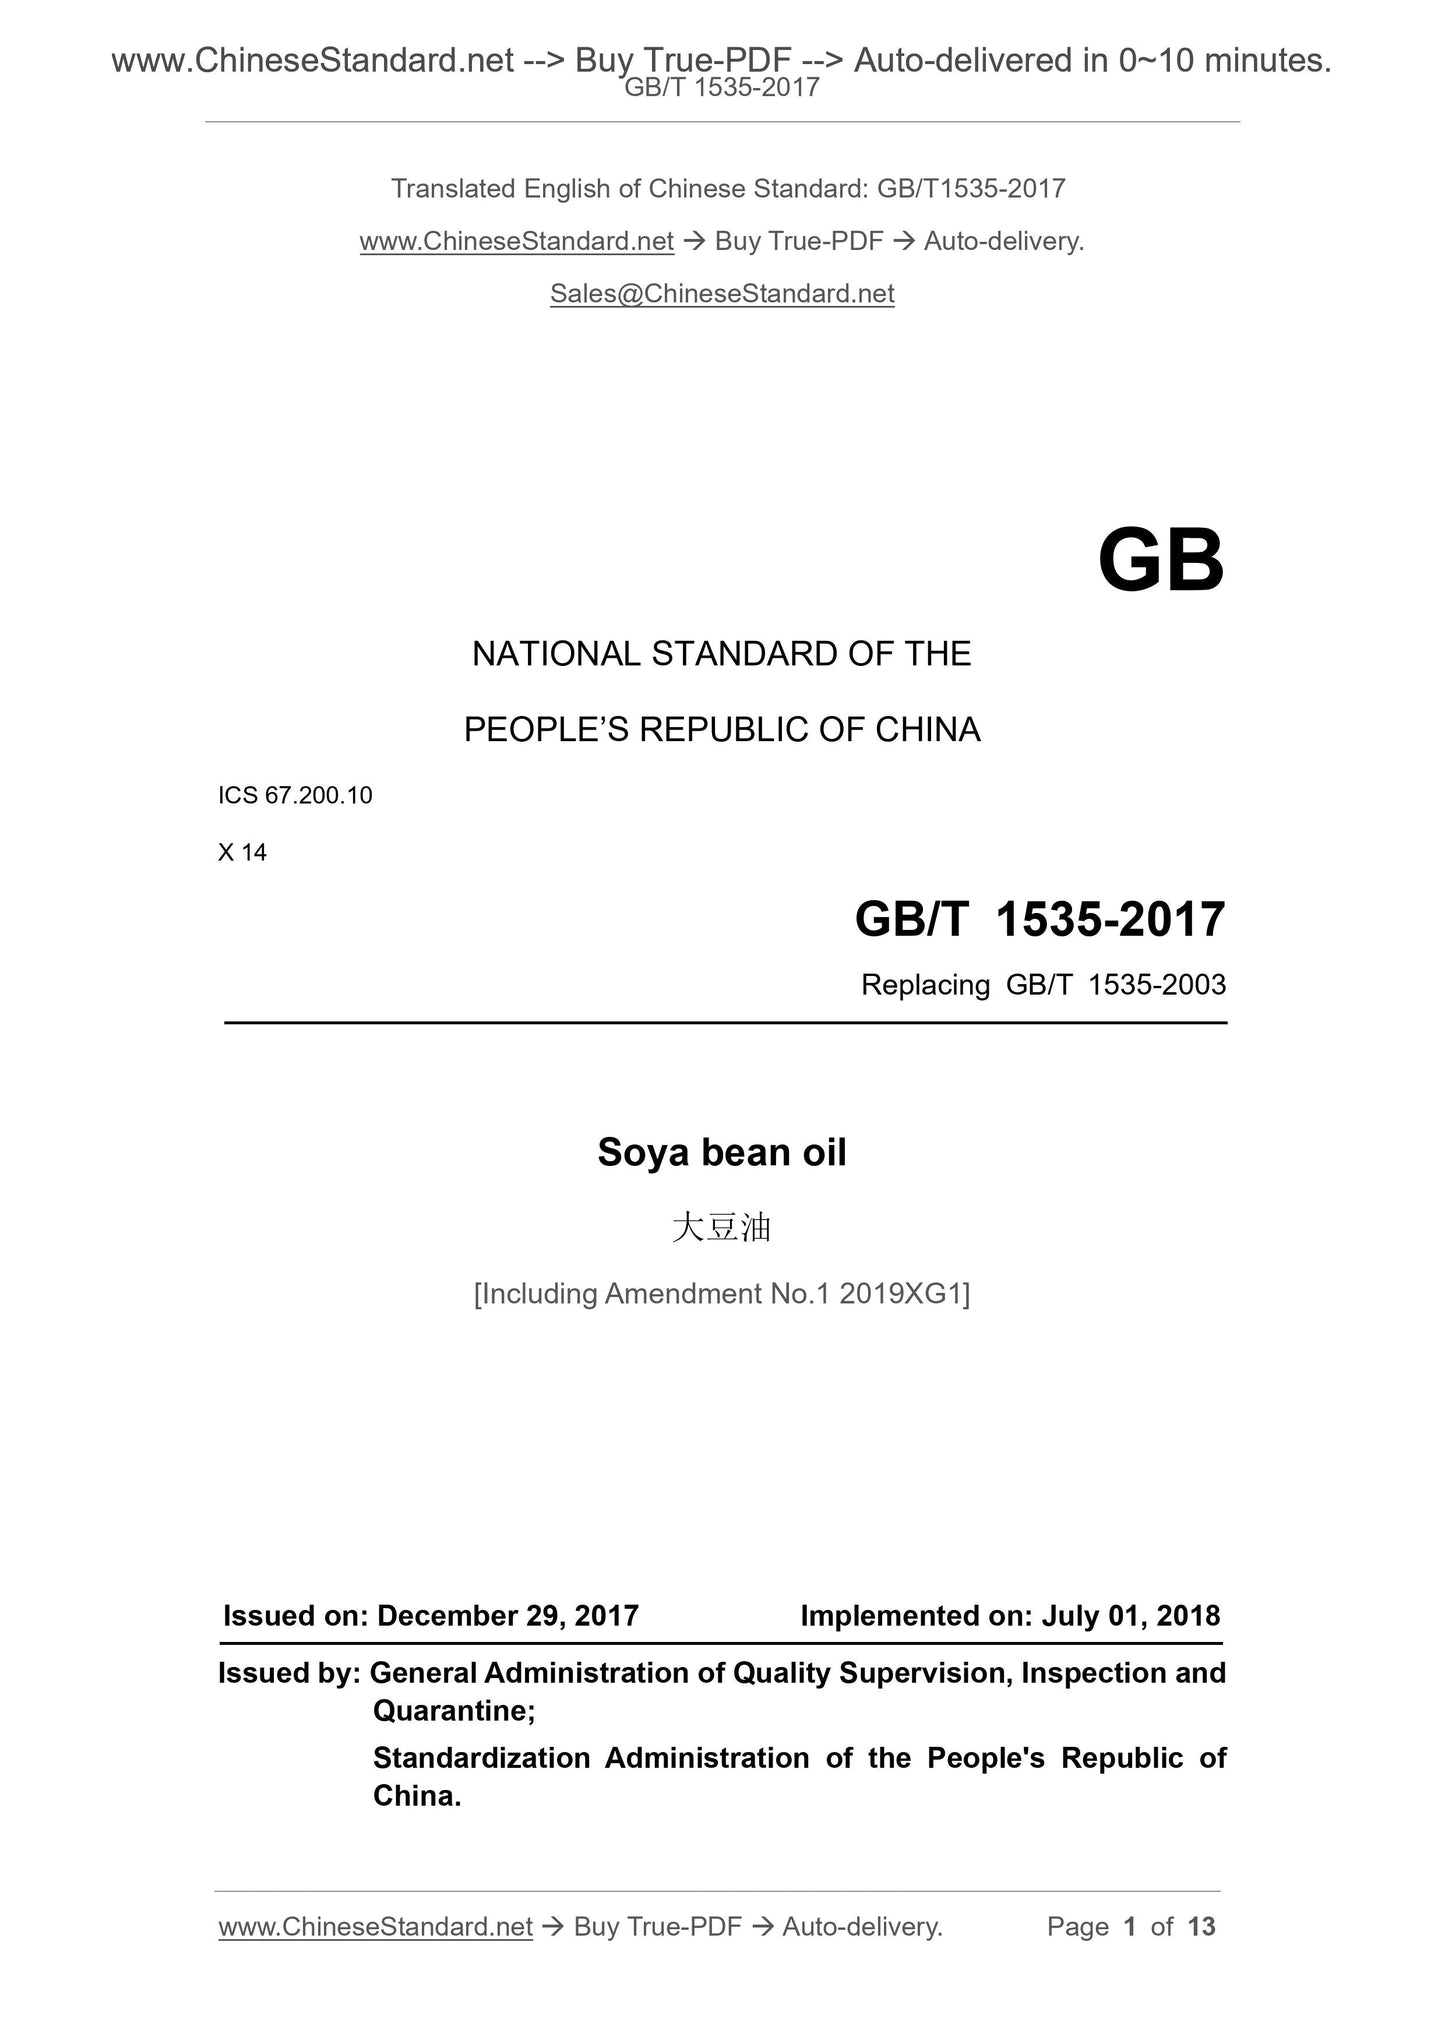 GB/T 1535-2017 Page 1